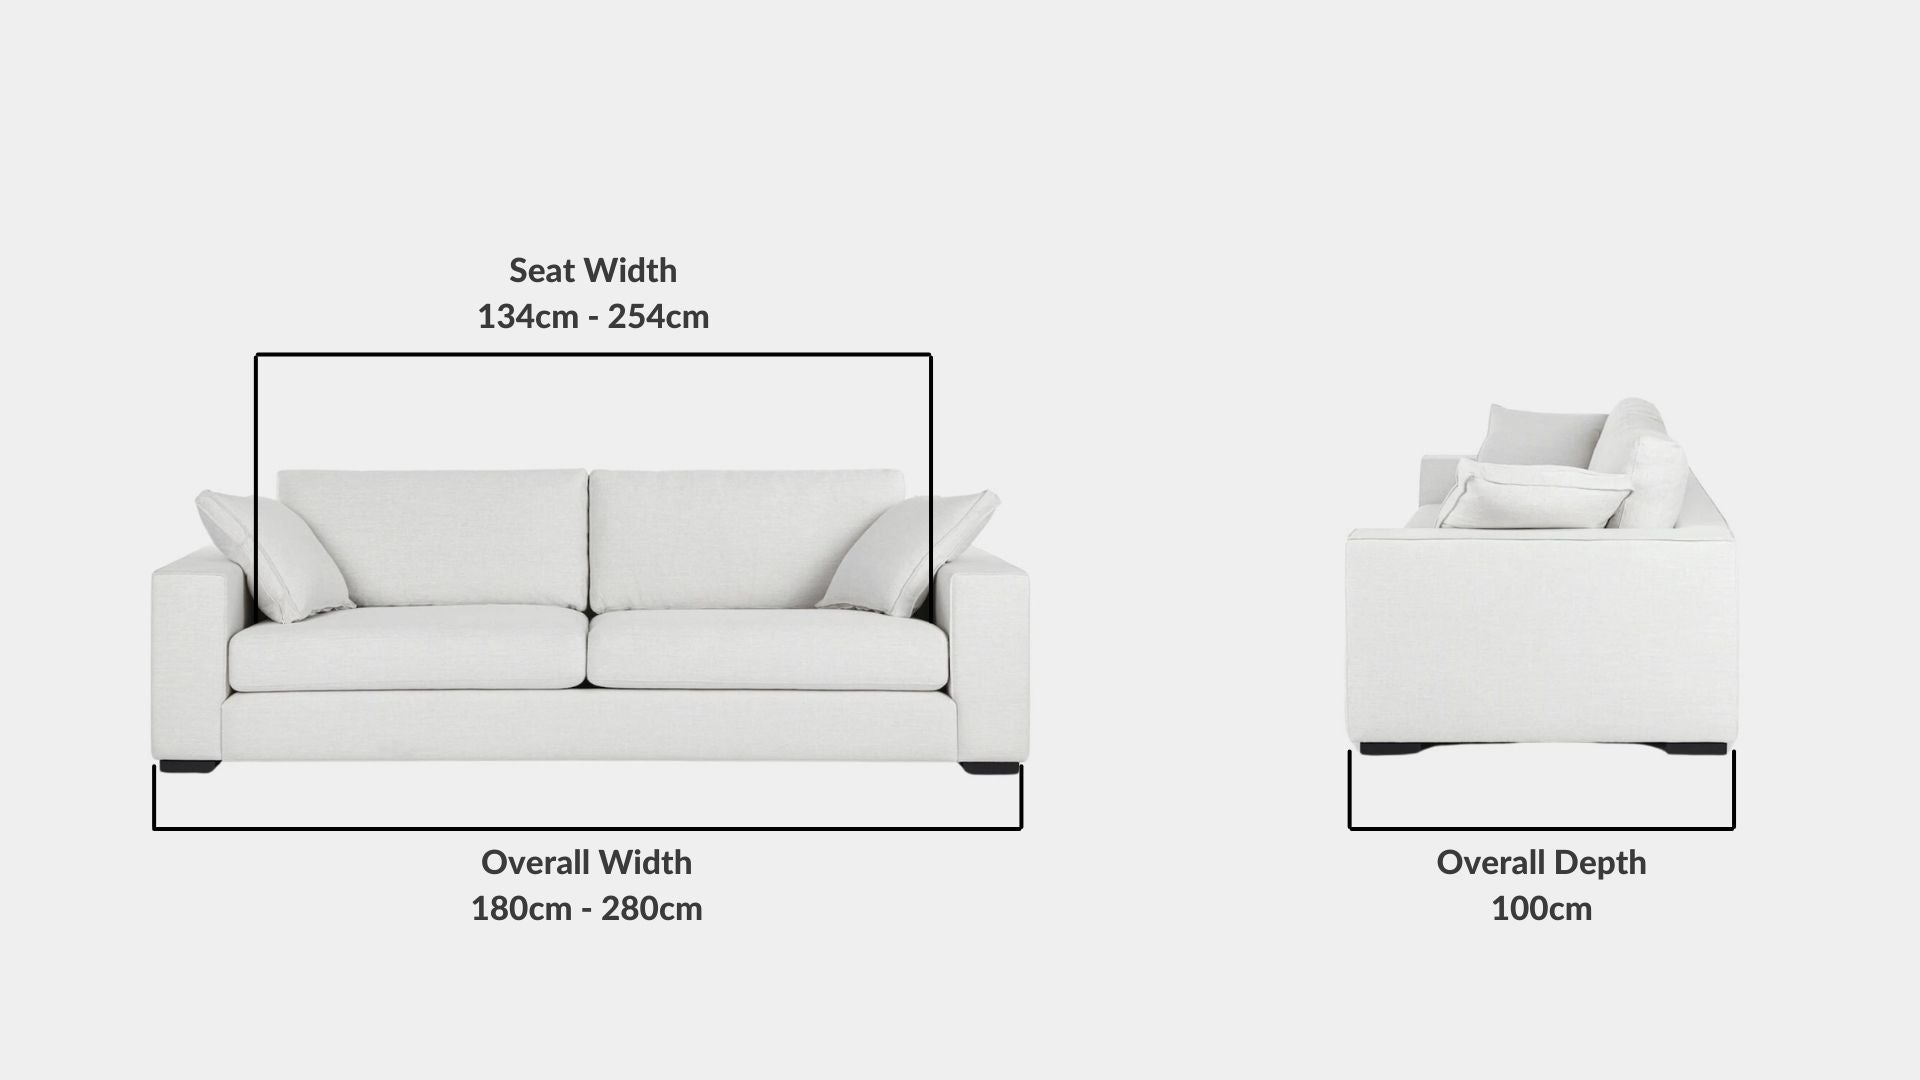 Details the key dimensions in terms of overall width, overall depth and seat width for Coastal Fabric Sofa